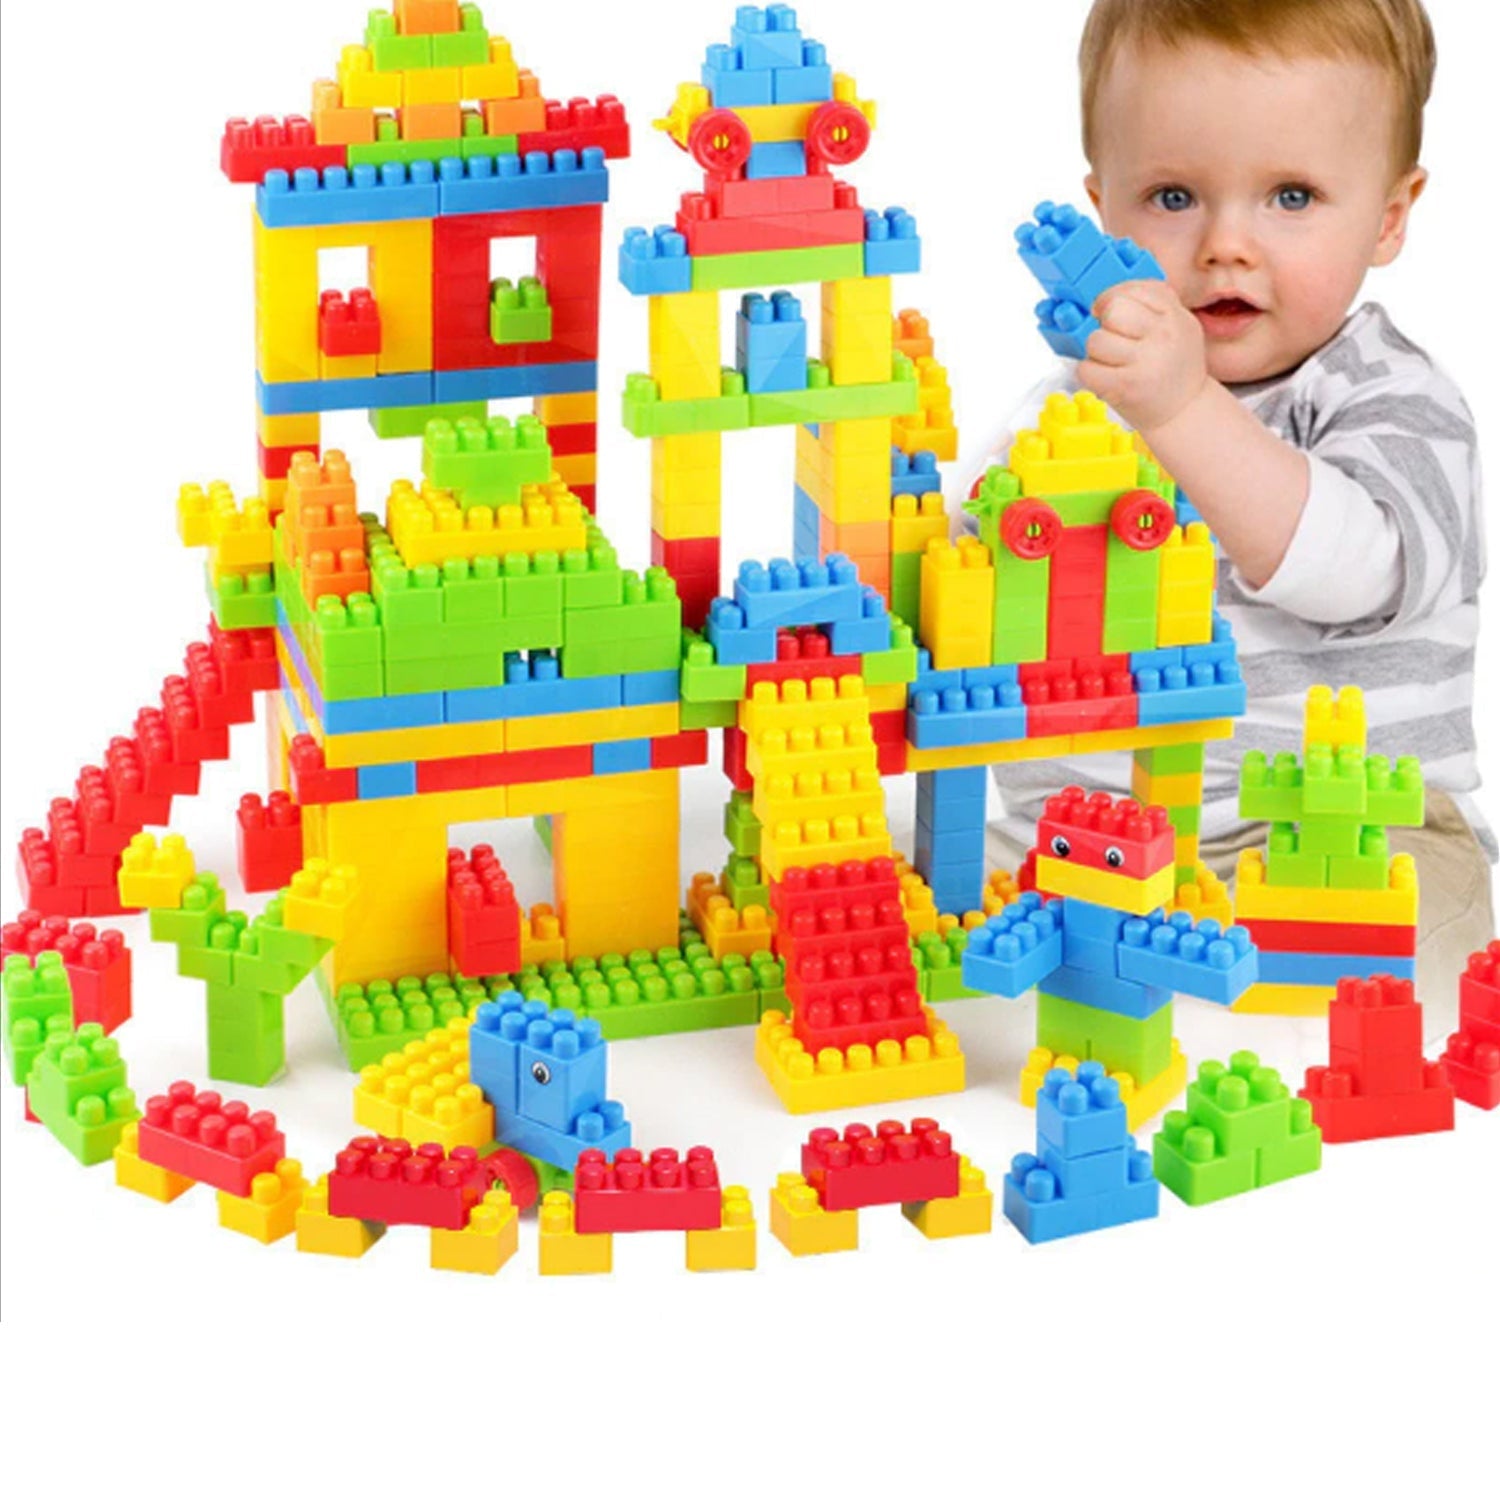 4627 A Building Blocks 60 Pc widely used by kids and children for playing and entertaining purposes among all kinds of household and official places etc - DeoDap